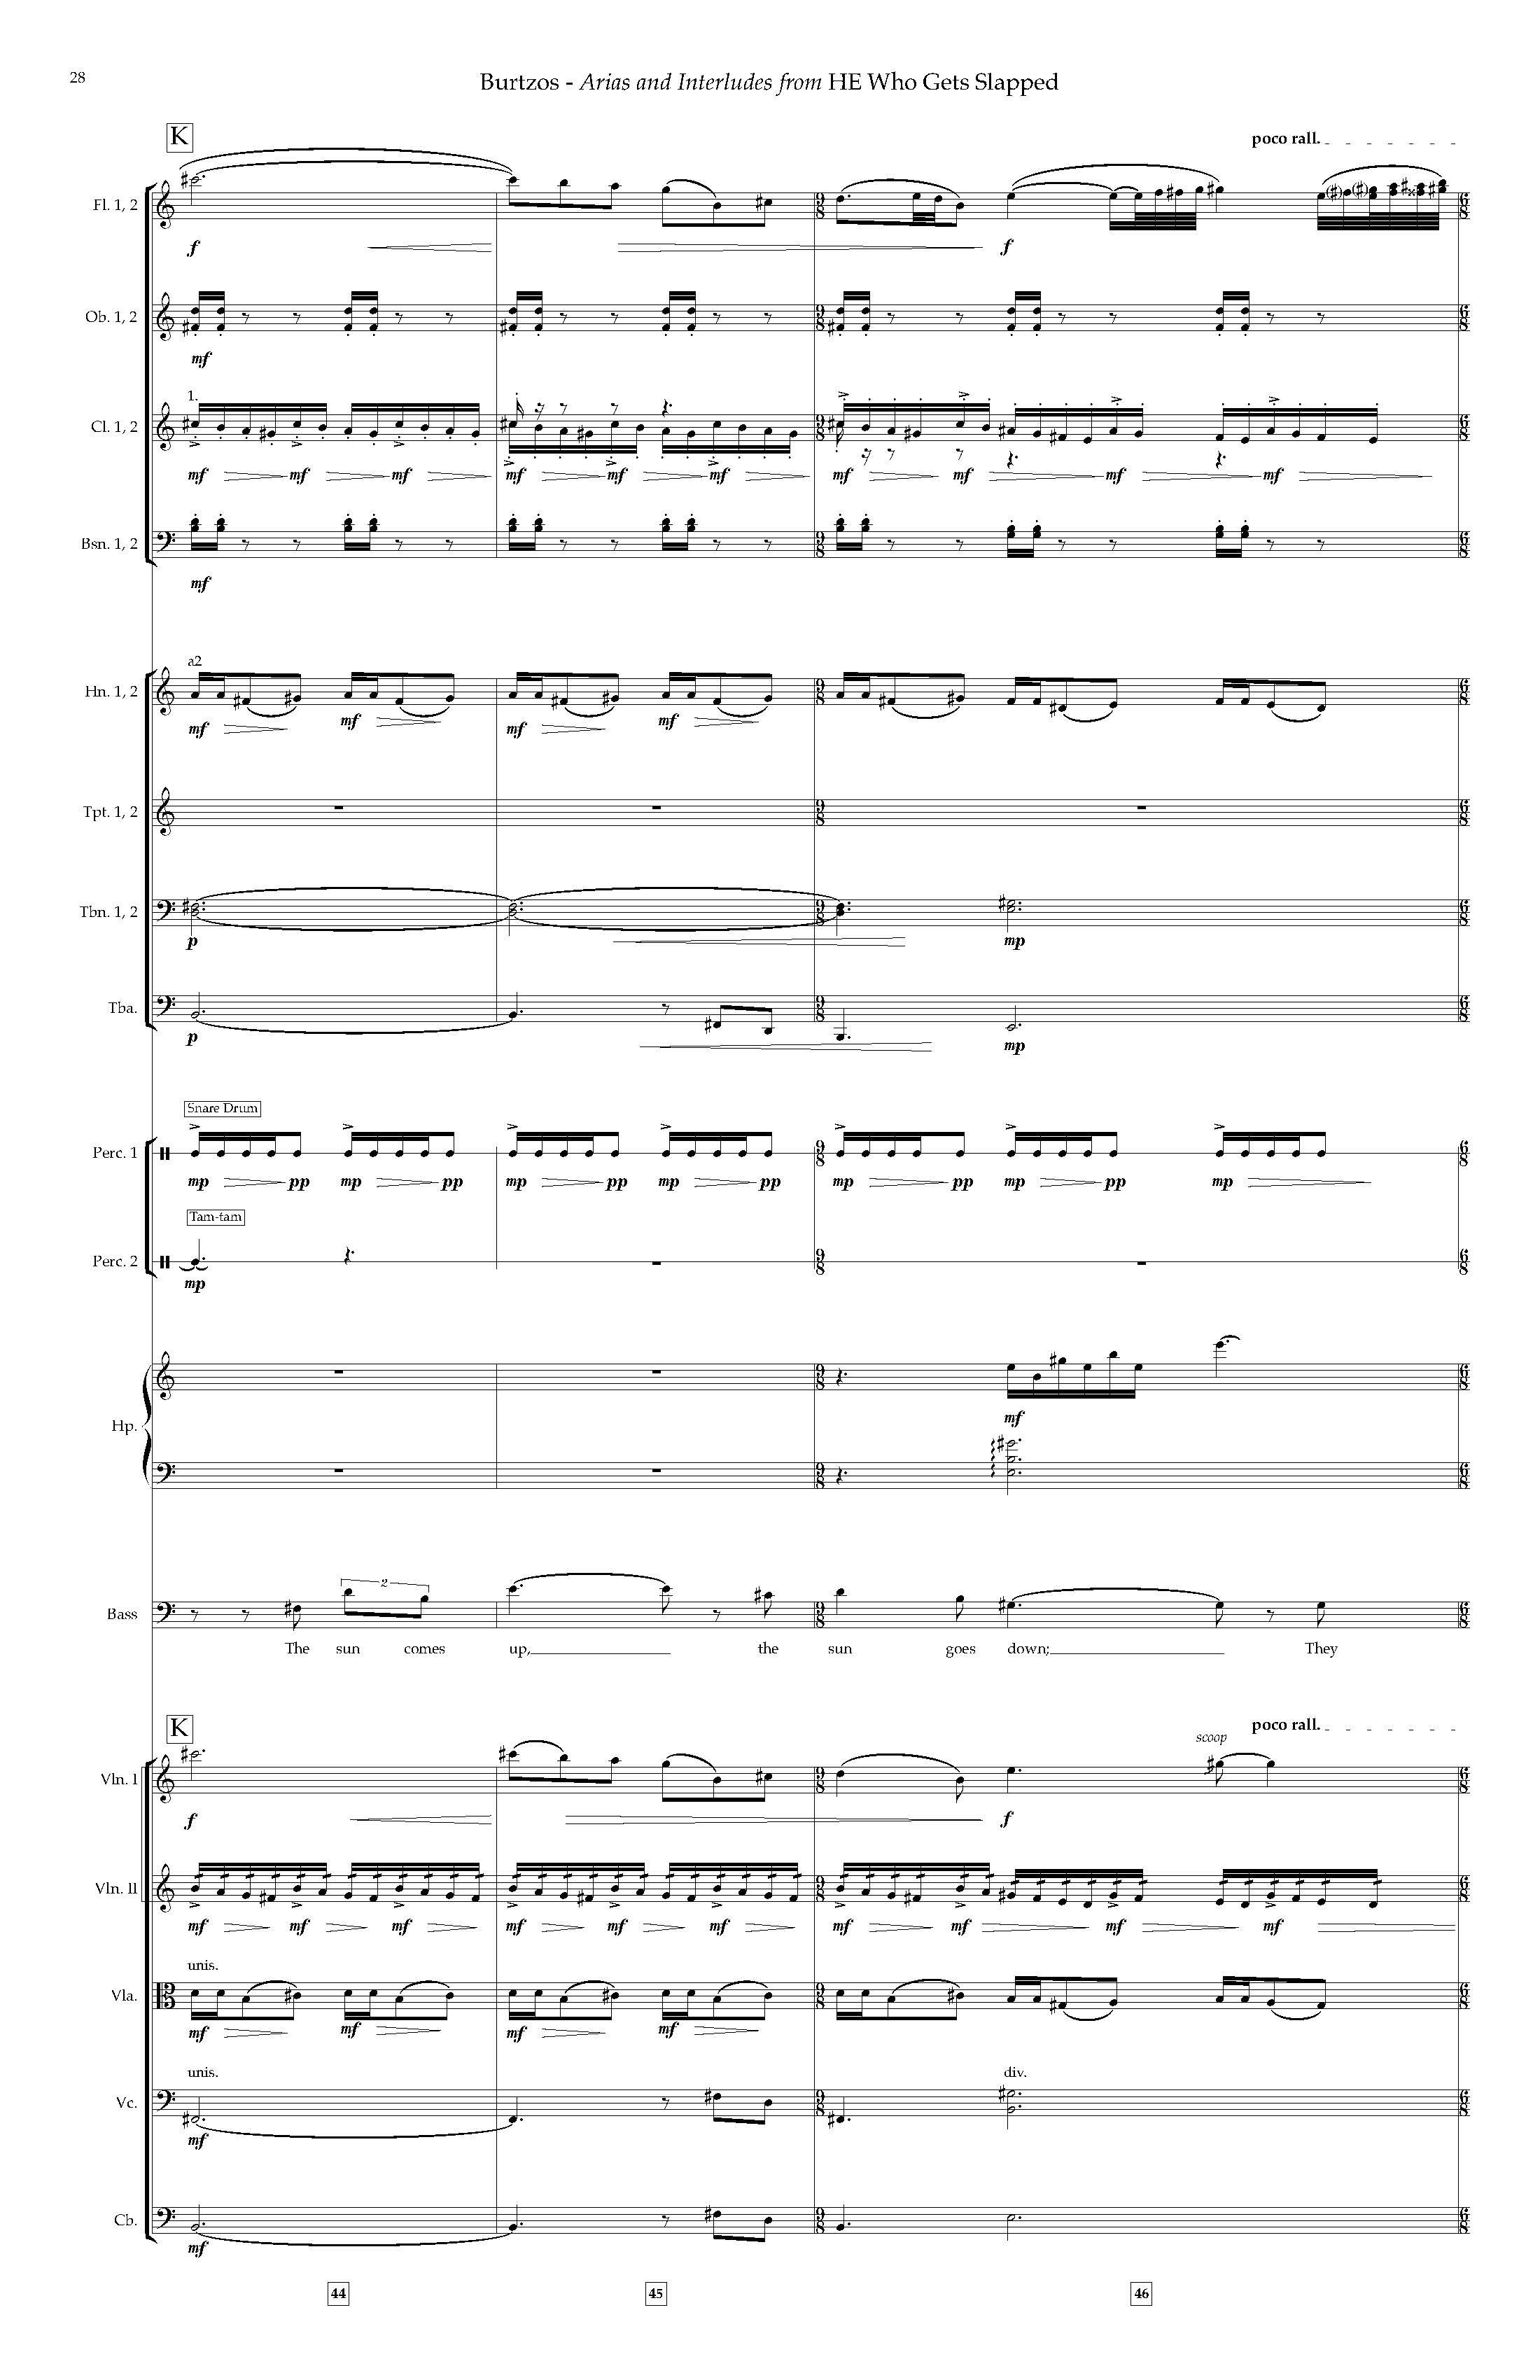 Arias and Interludes from HWGS - Complete Score_Page_34.jpg